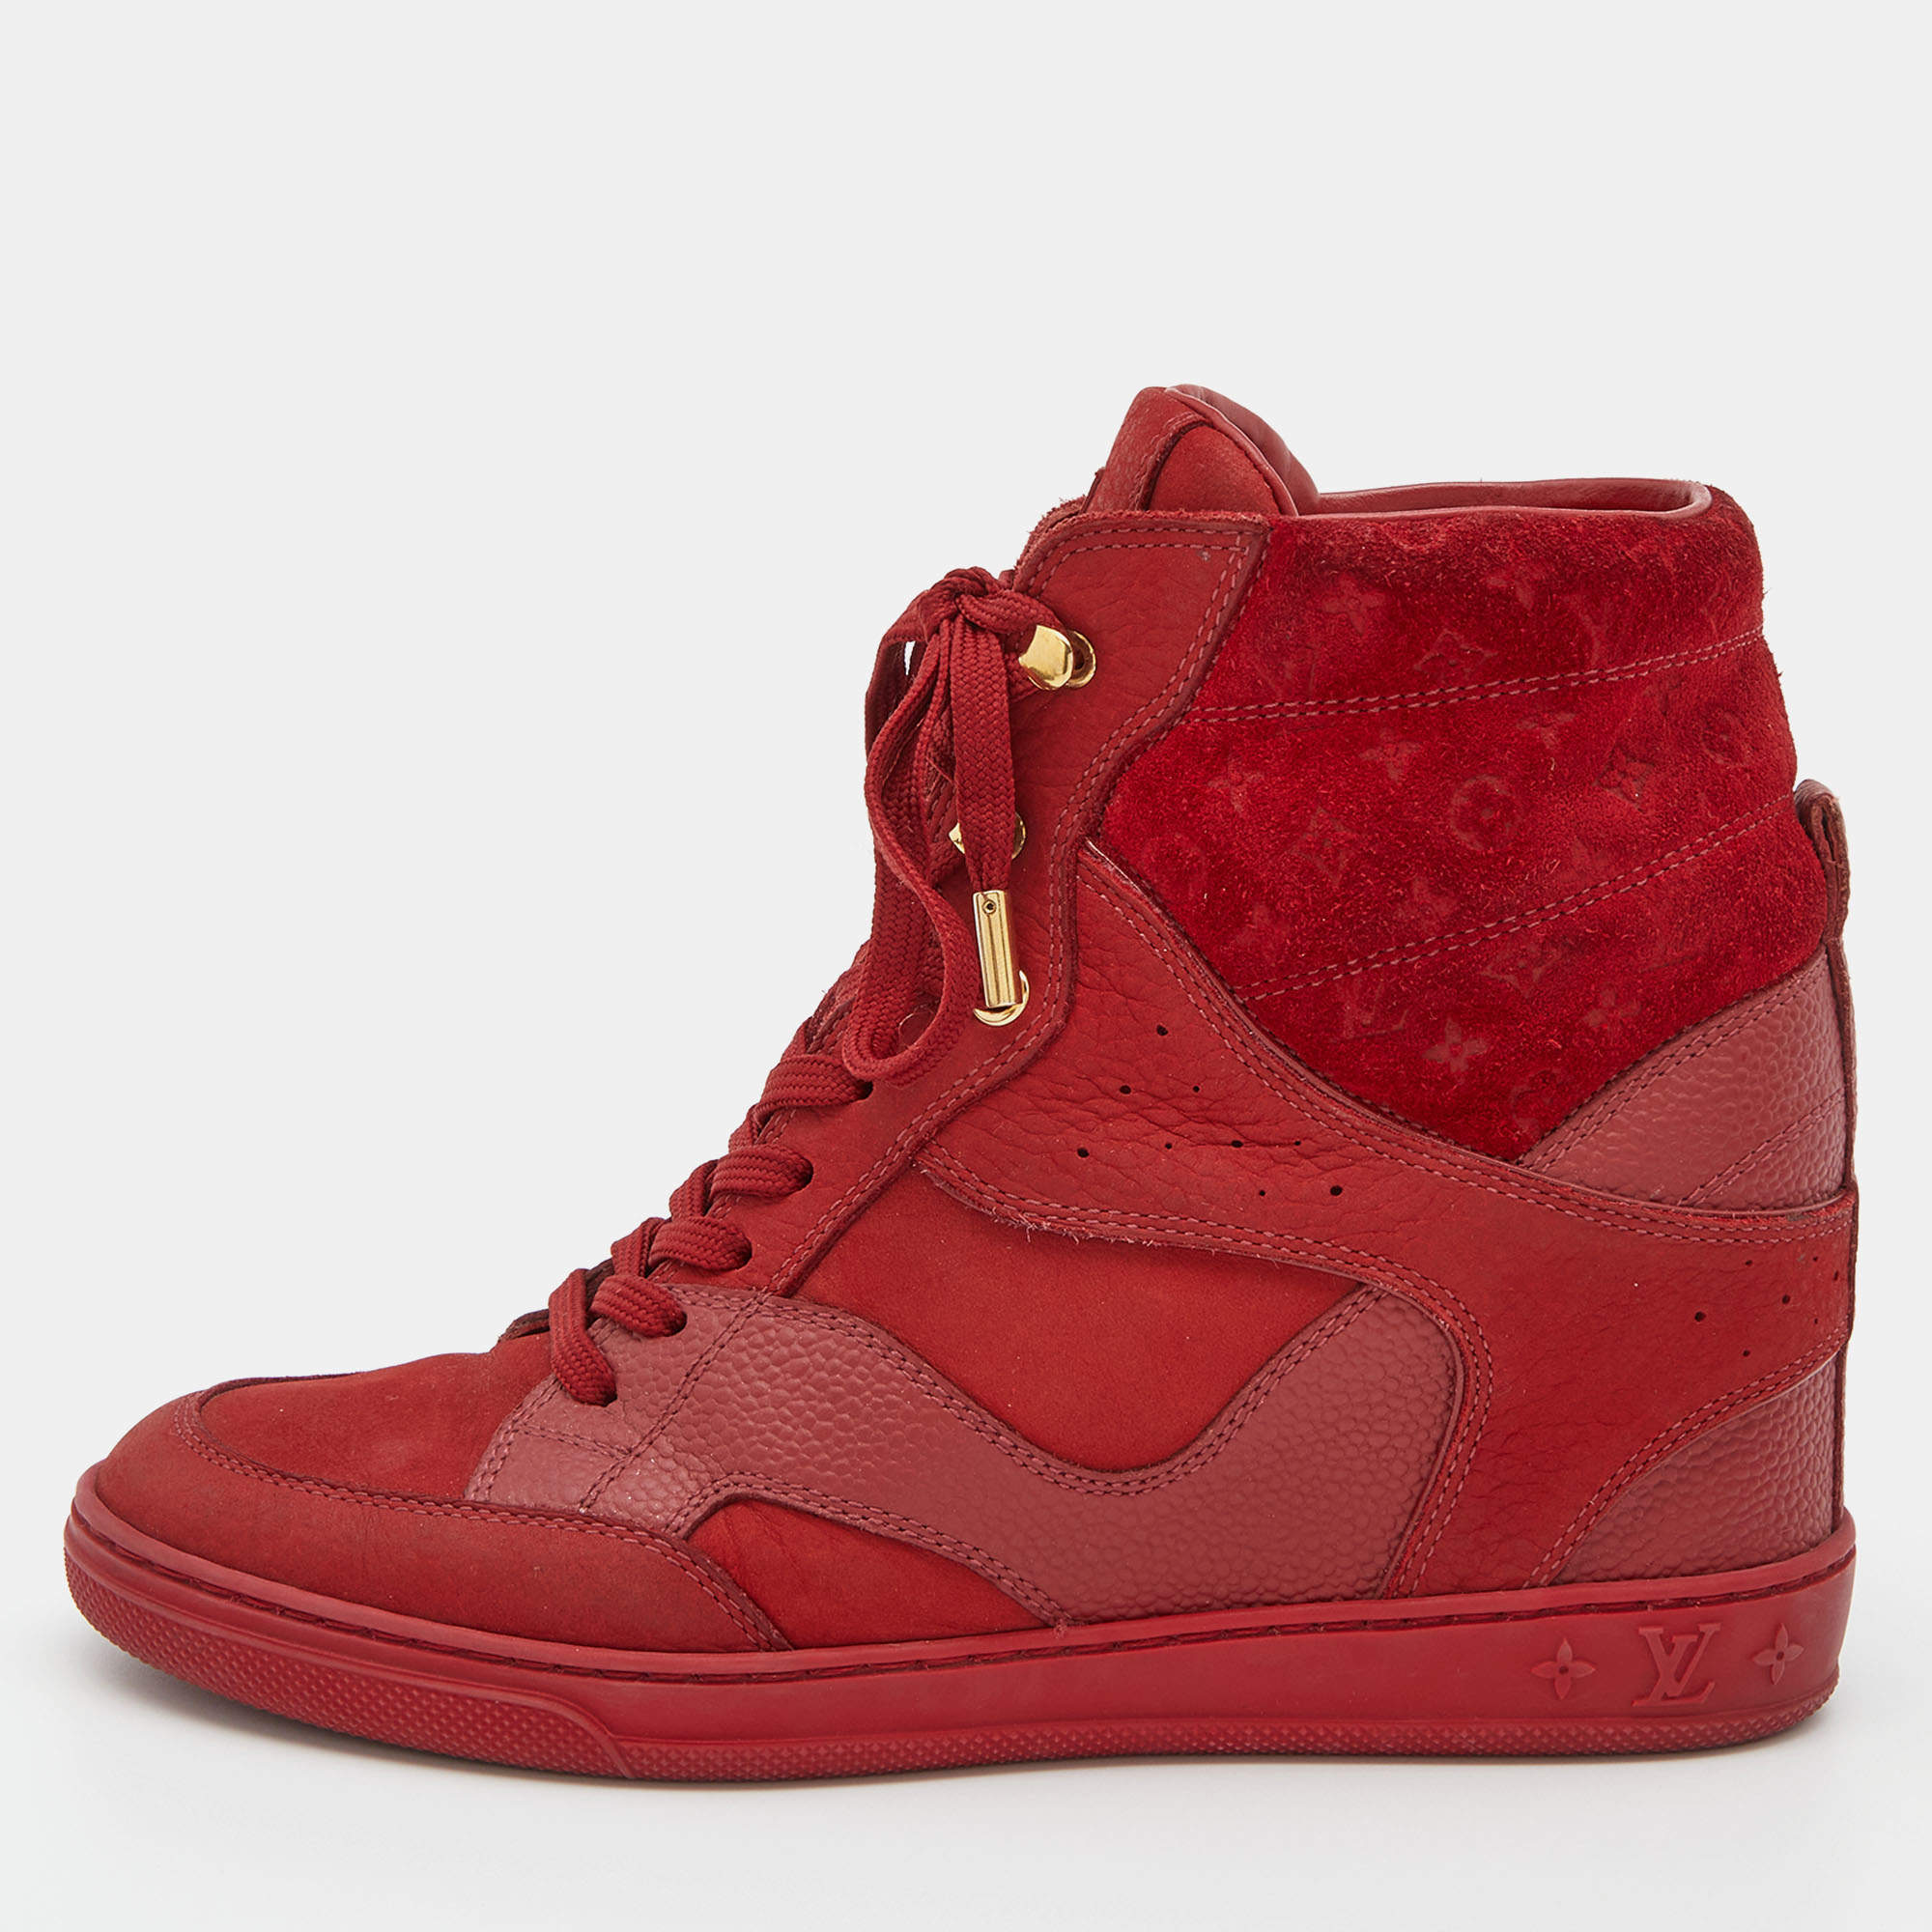 Louis Vuitton Red Monogram Suede and Leather High Top Sneakers Size 36.5